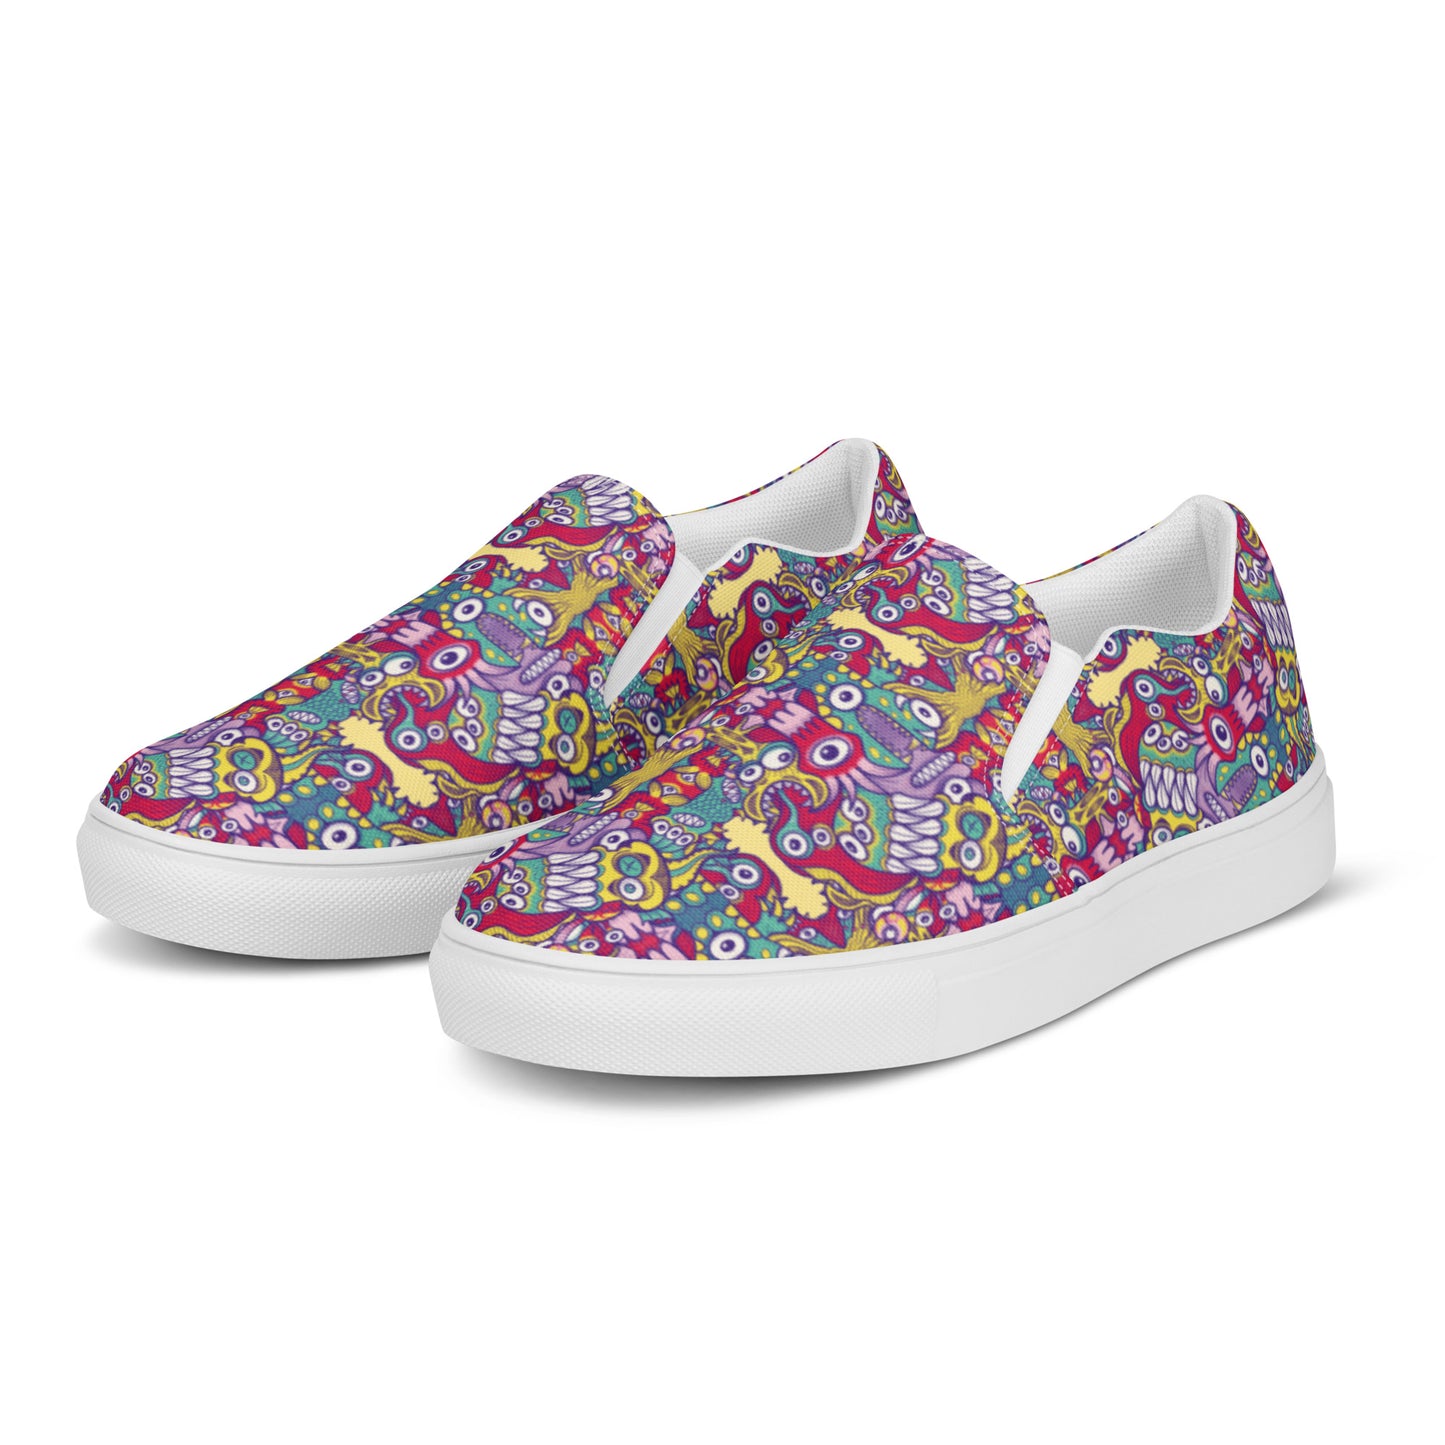 Exquisite corpse doodles in a pattern design Men’s slip-on canvas shoes. Overview